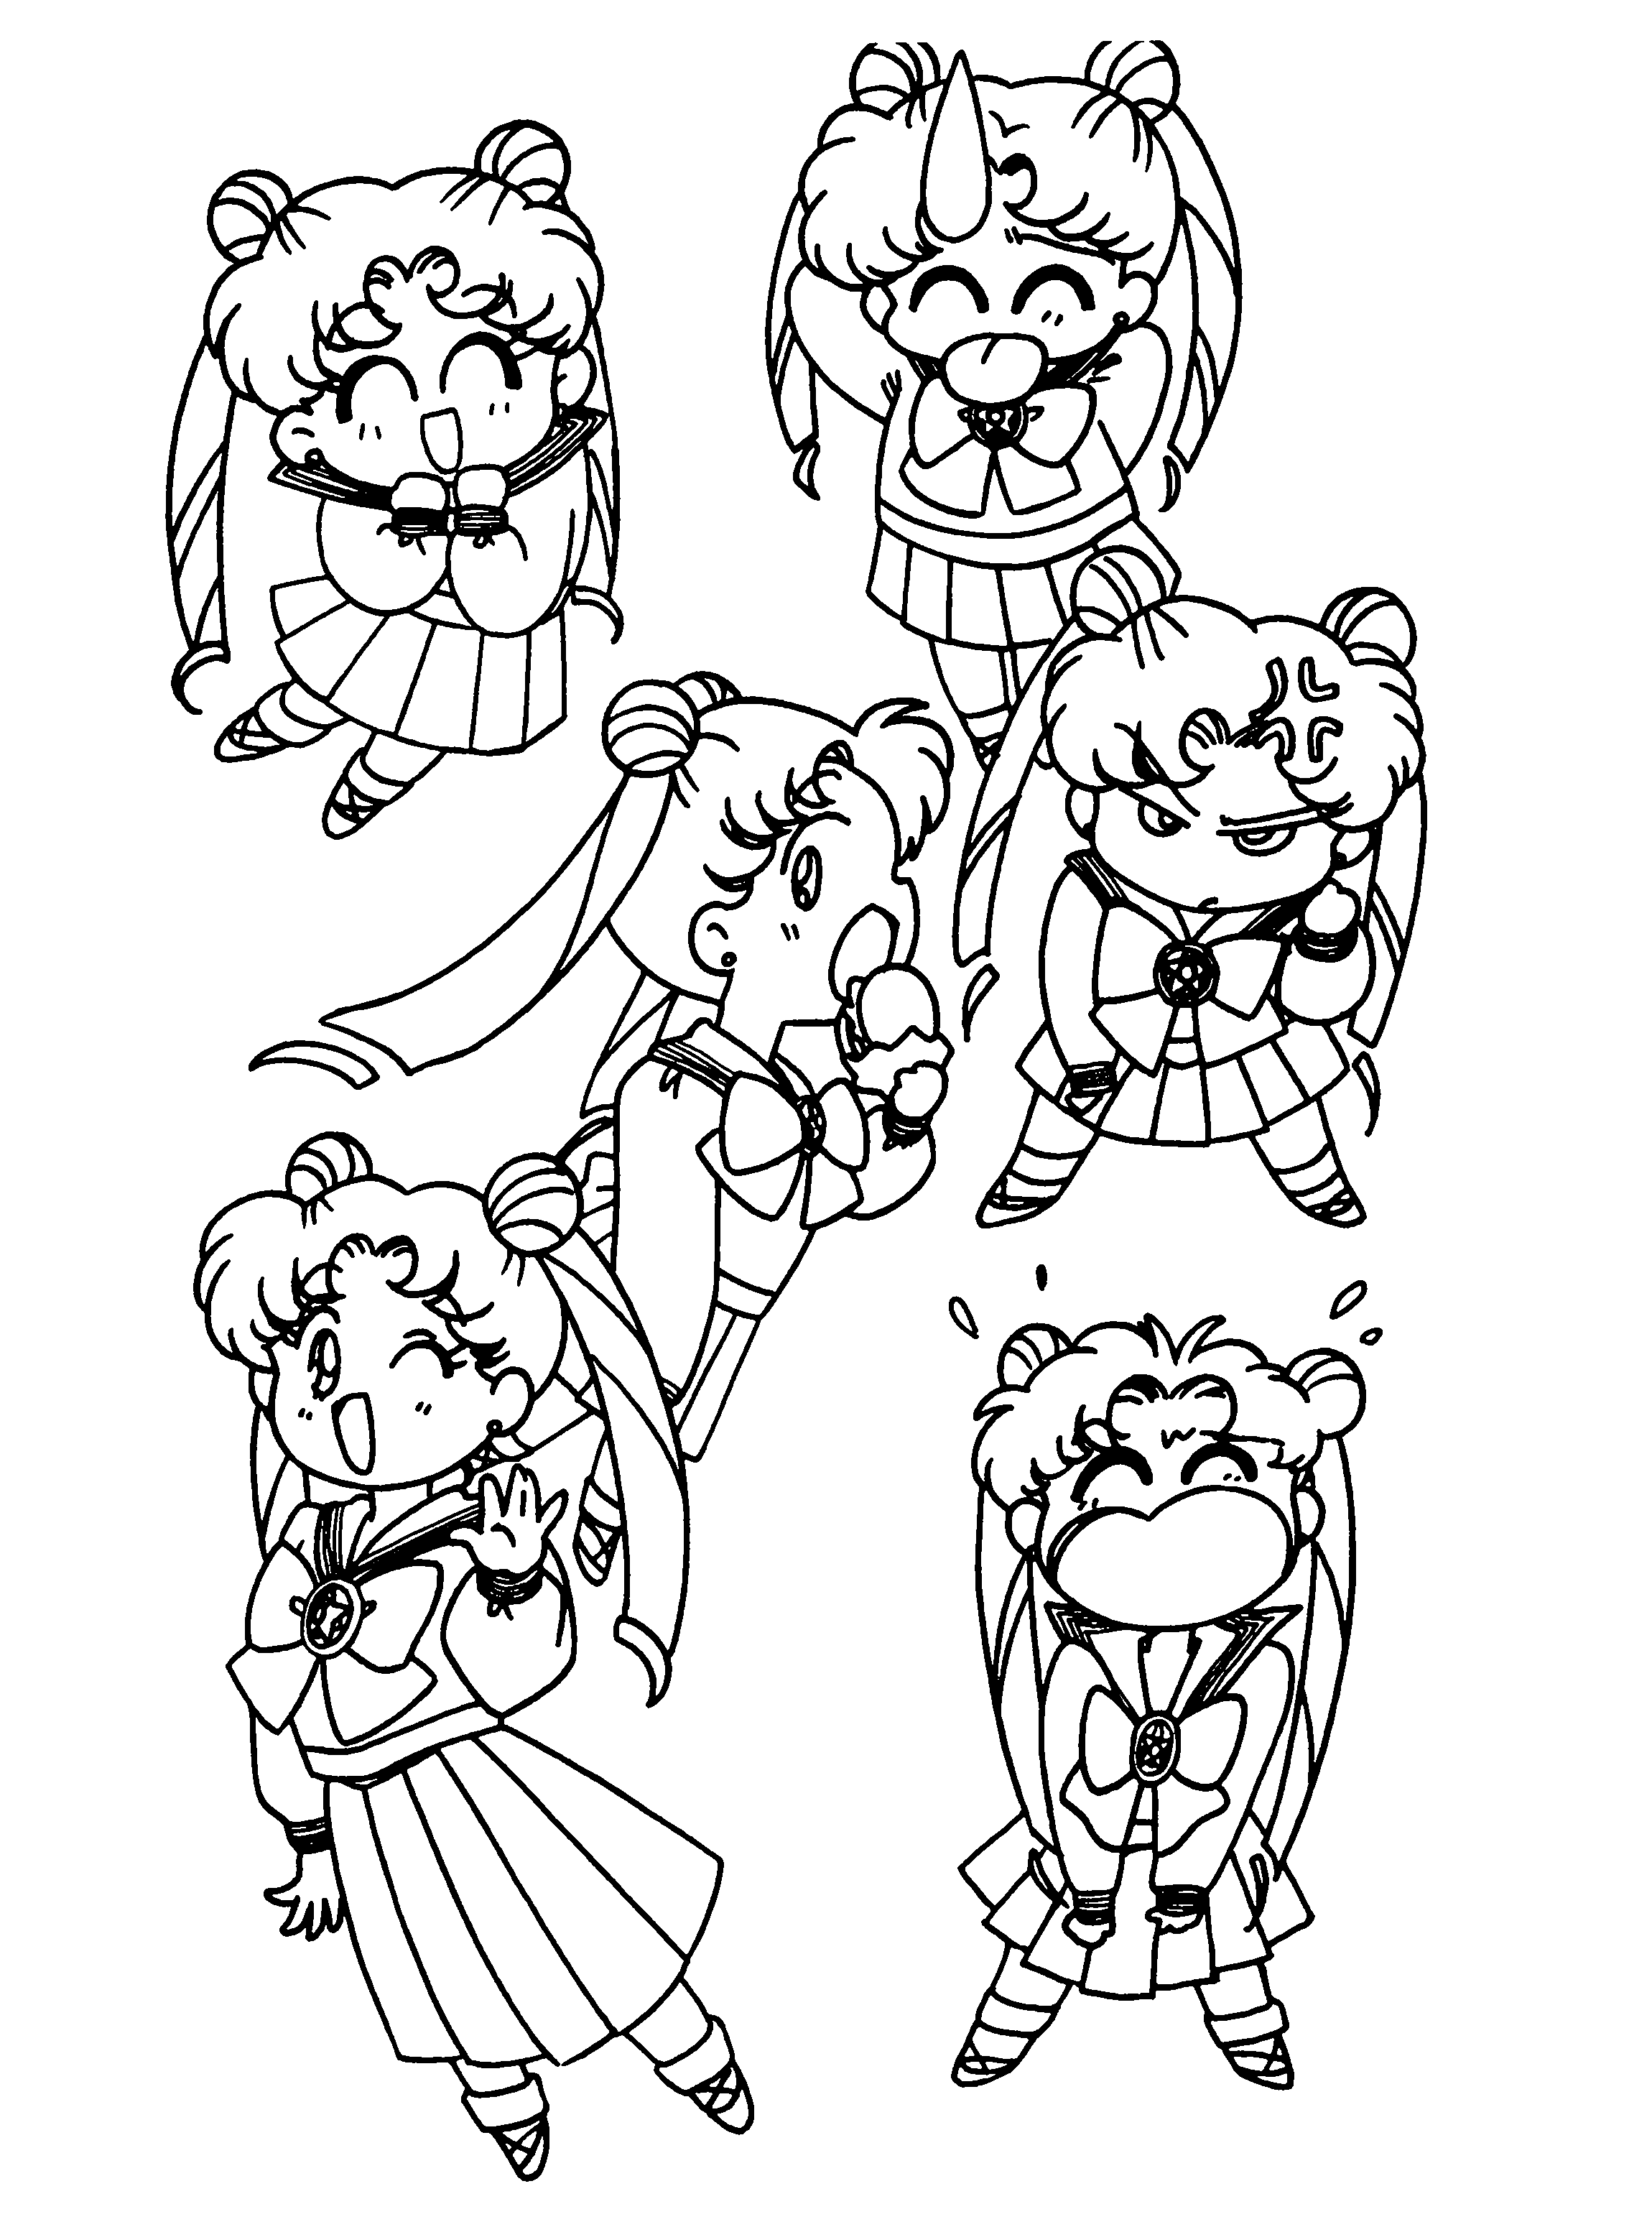 Sailor Moon #50302 (Cartoons) Free Printable Coloring Pages